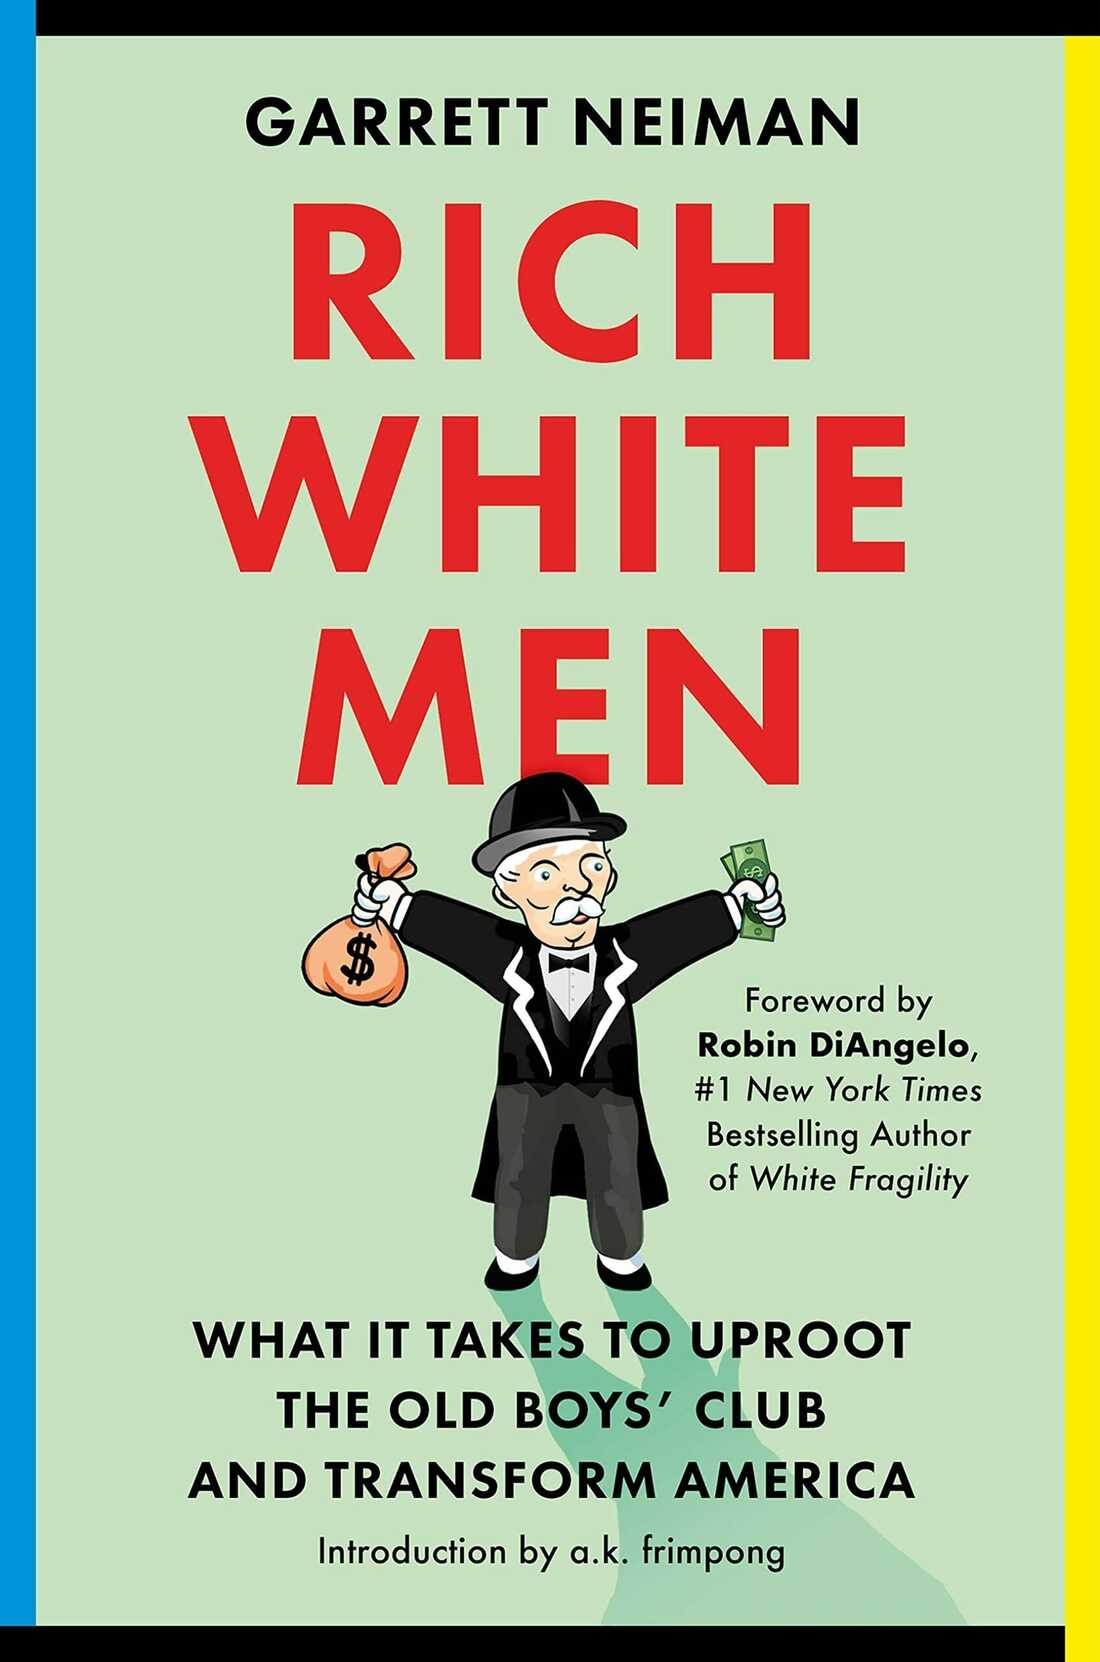 Rich White Men: What It Takes to Uproot the Old Boys' Club and Transform America (Hardcover)